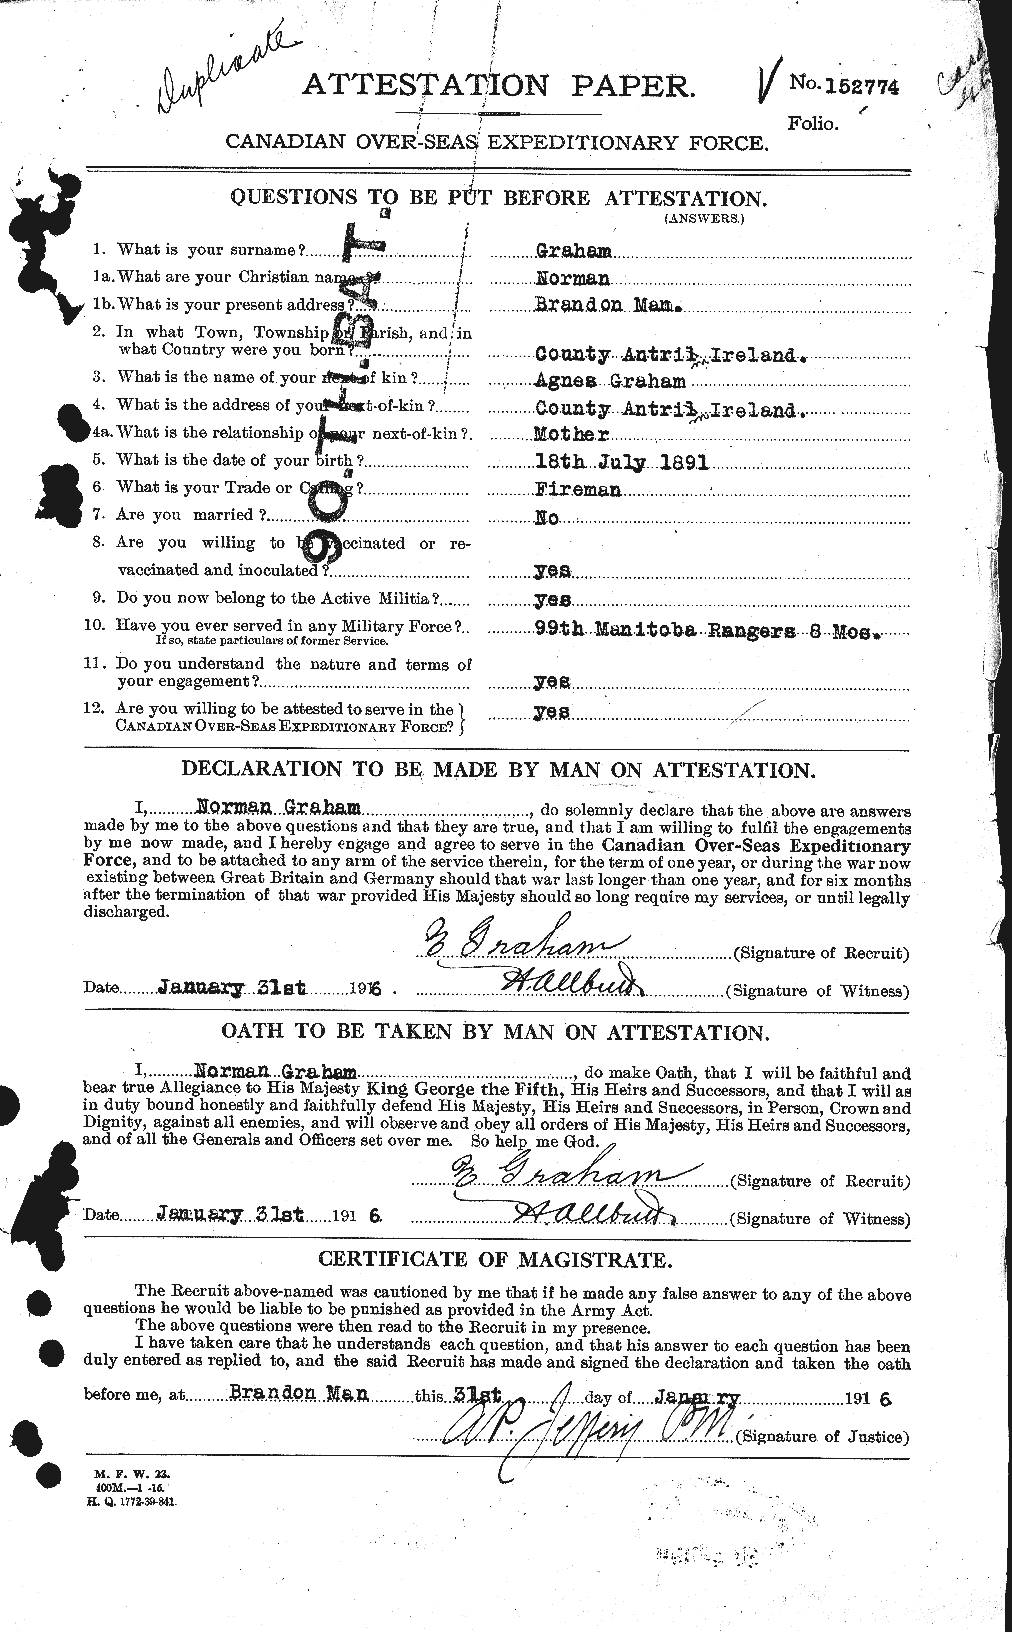 Personnel Records of the First World War - CEF 359321a